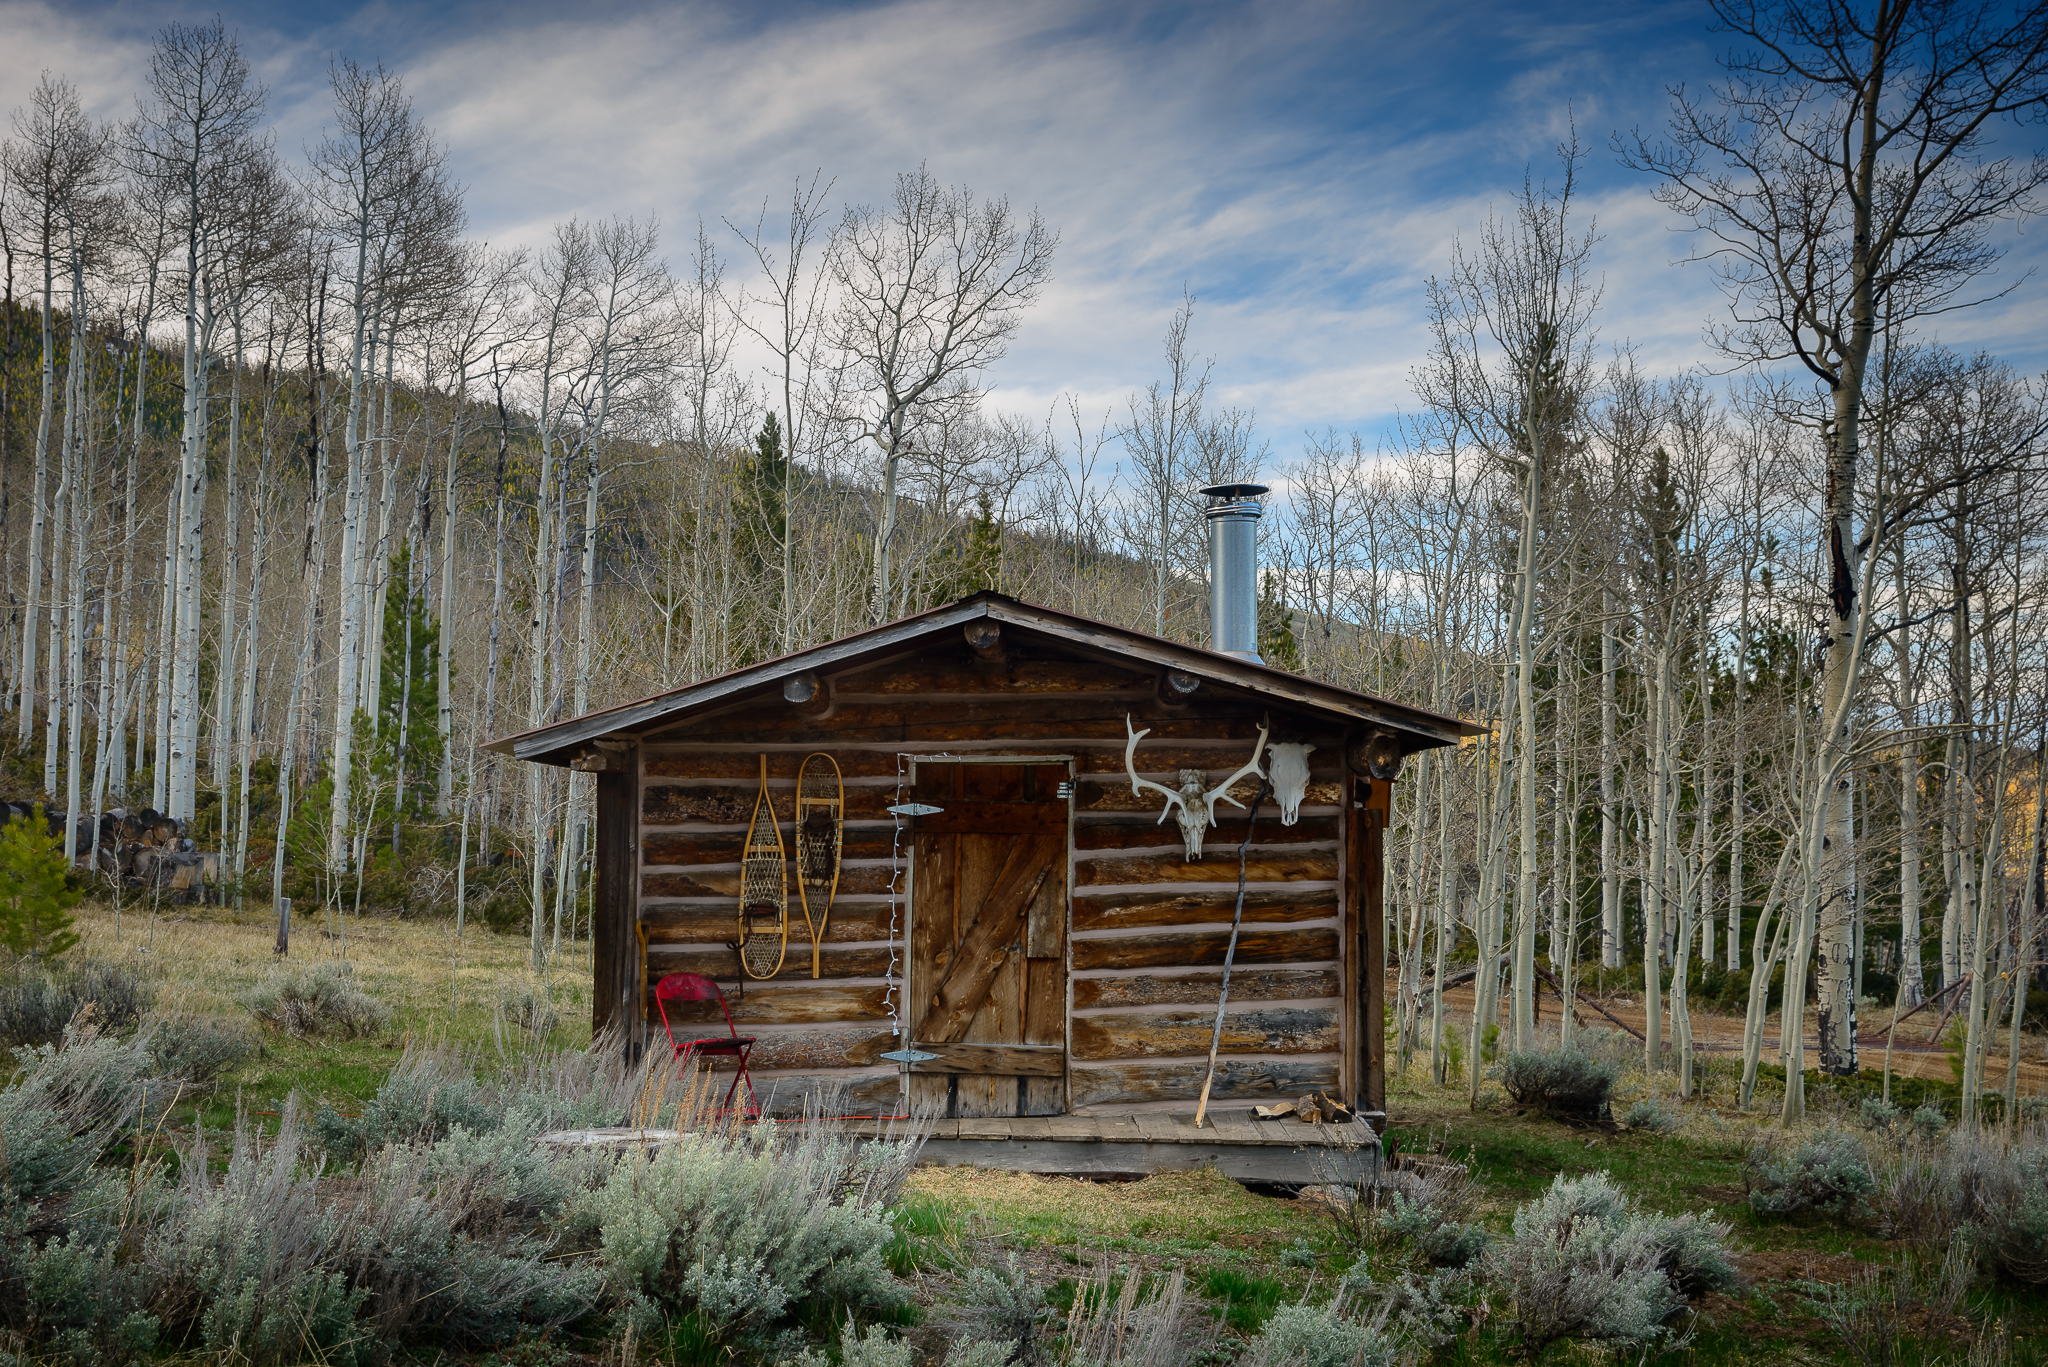  The Trapper Cabin.&nbsp; Rustic and just the essentials.&nbsp; Walden, CO. 